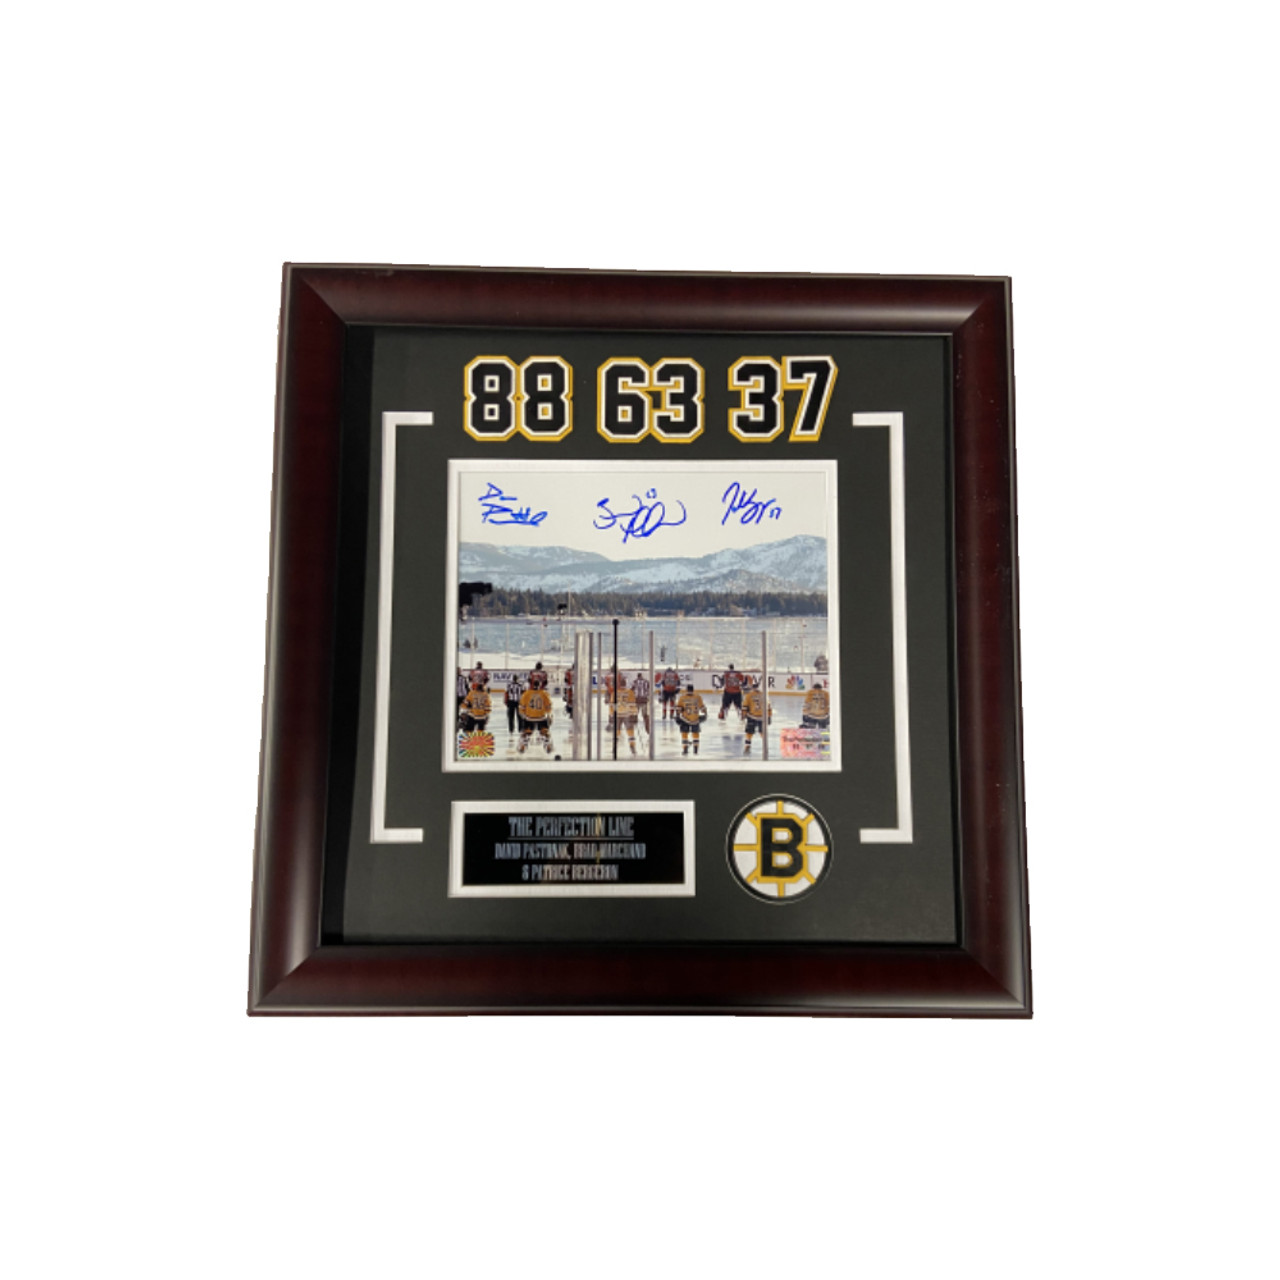 Brad Marchand and David Pastrnak Signed / Autographed Photo 8x10 Frame